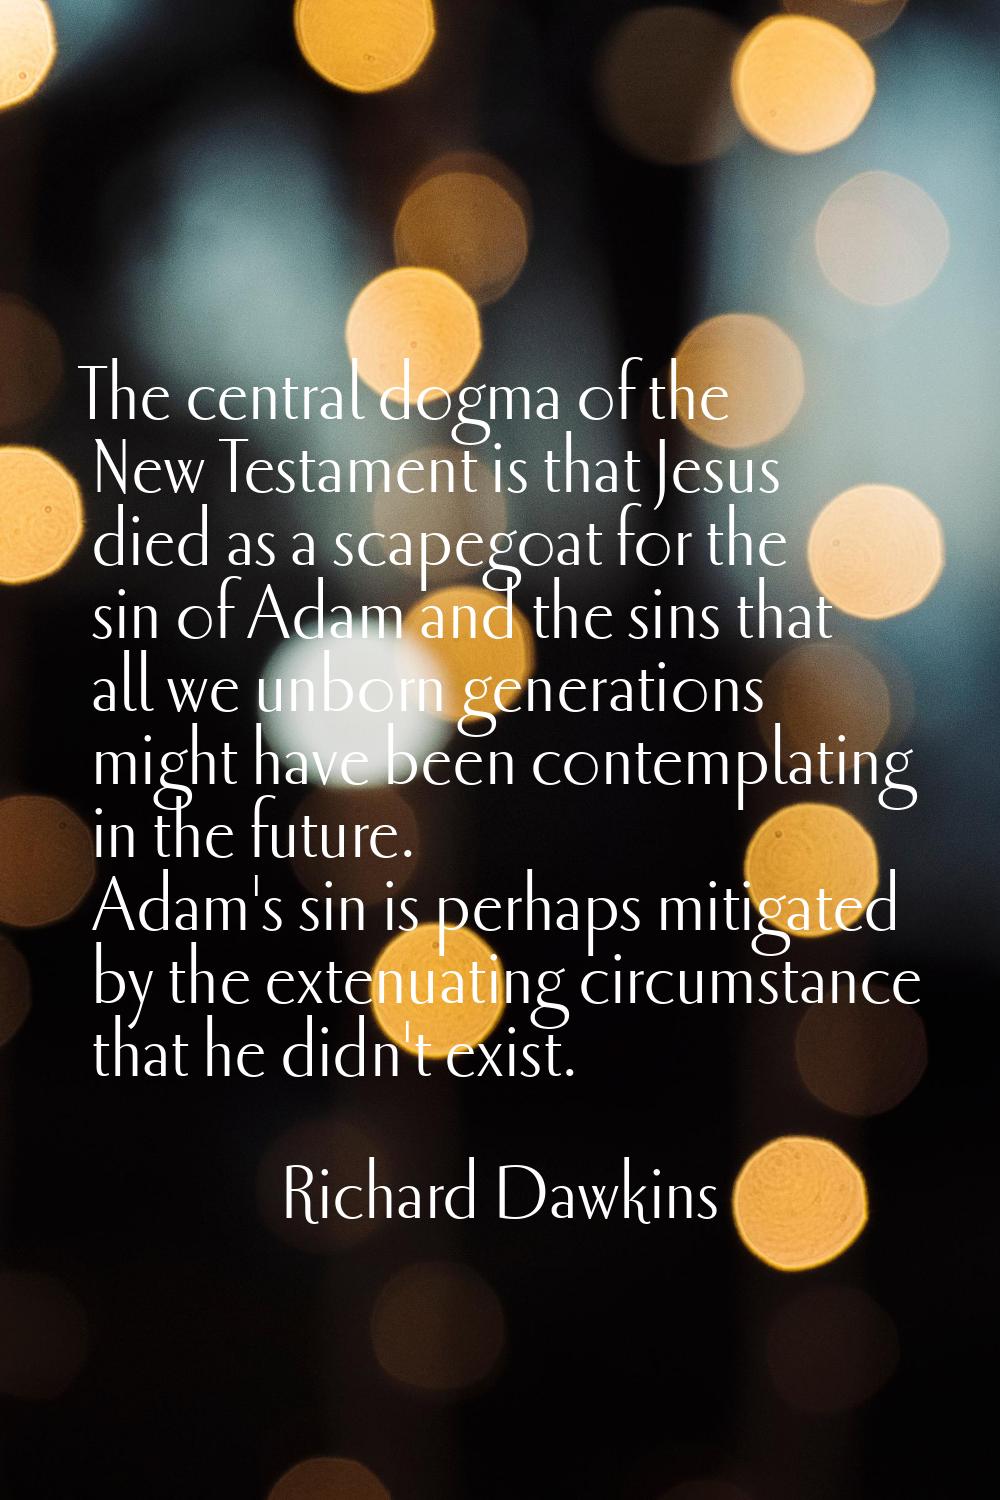 The central dogma of the New Testament is that Jesus died as a scapegoat for the sin of Adam and th